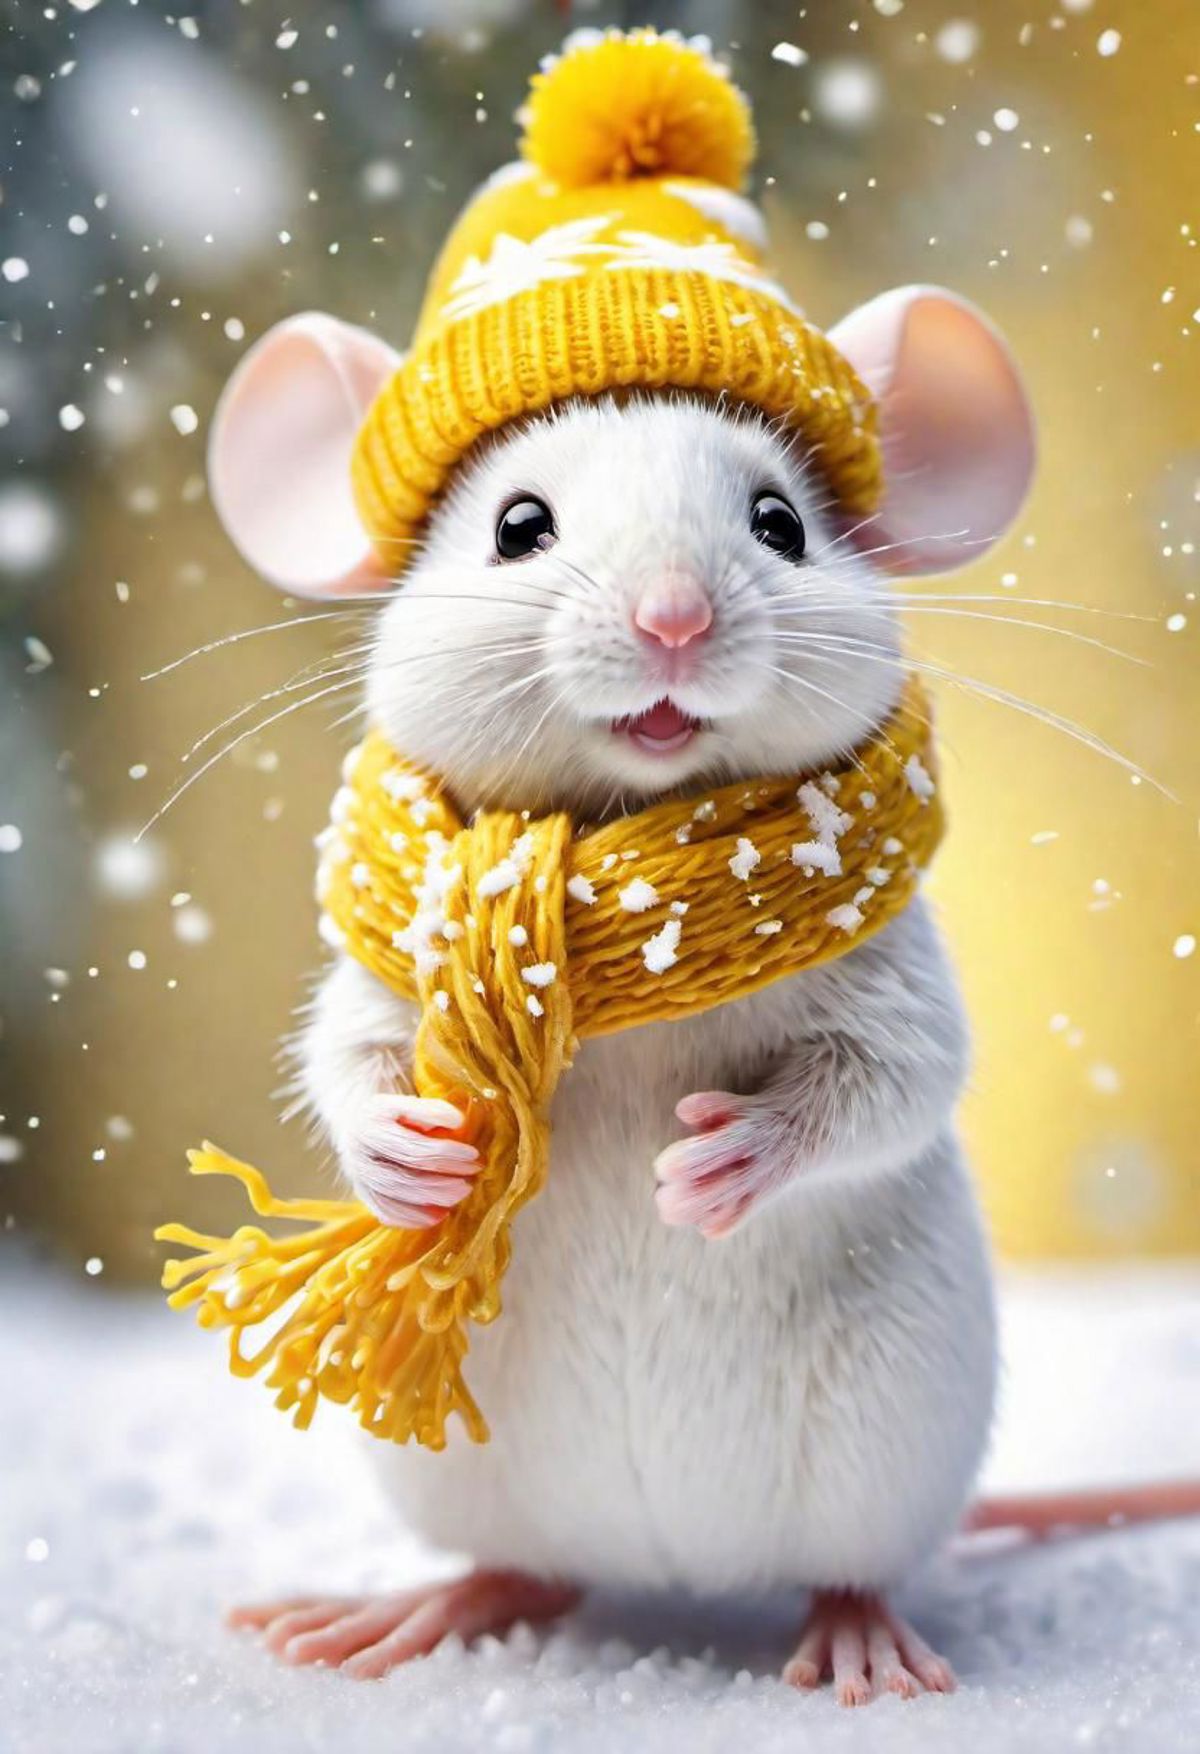 A small white mouse wearing a yellow scarf and hat.